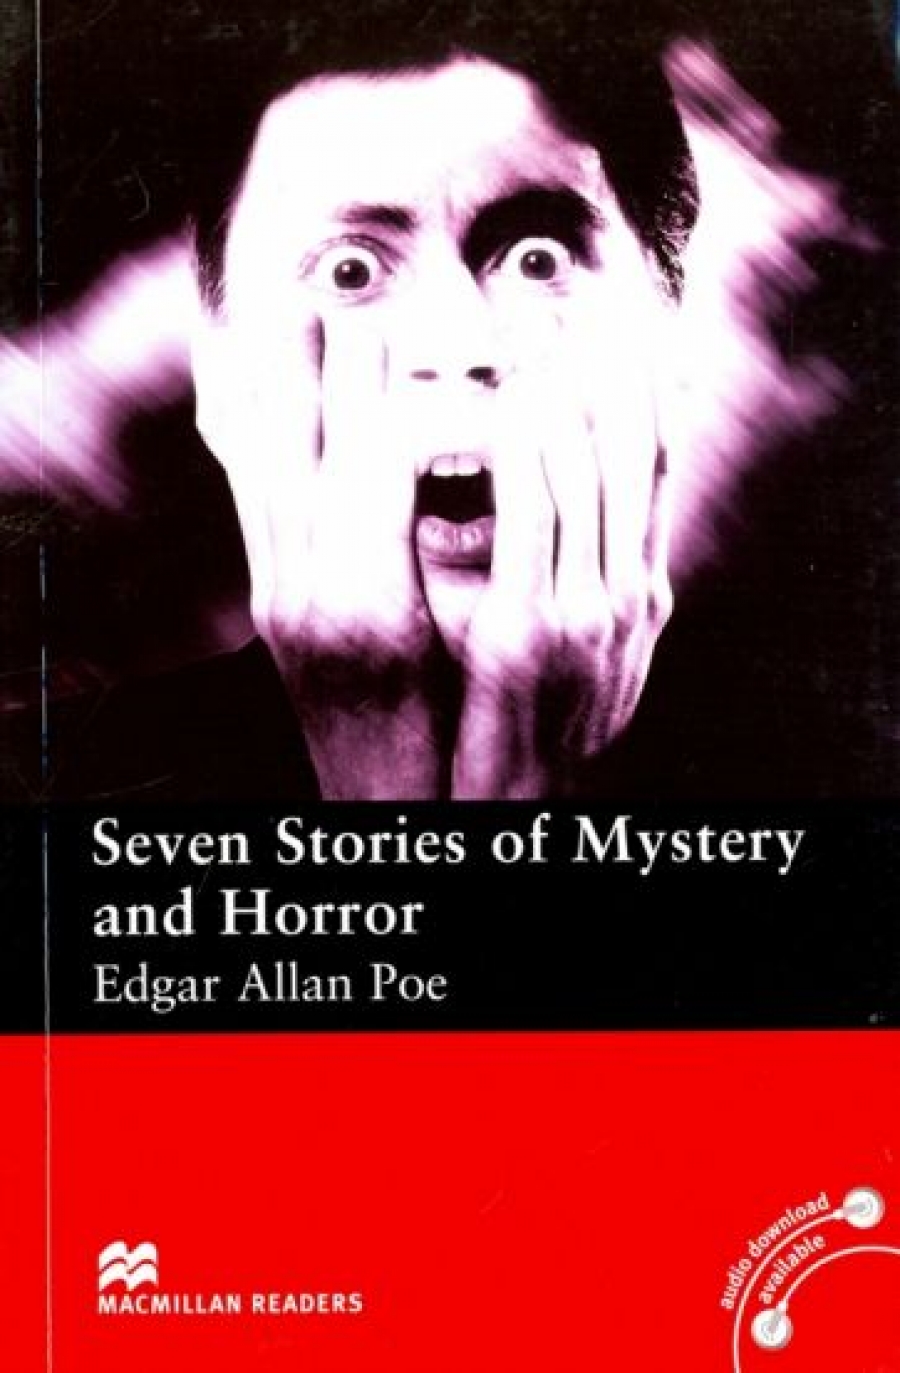 Edgar Allan Poe, retold by Stephen Colbourn Seven Stories of Mystery and Horror 